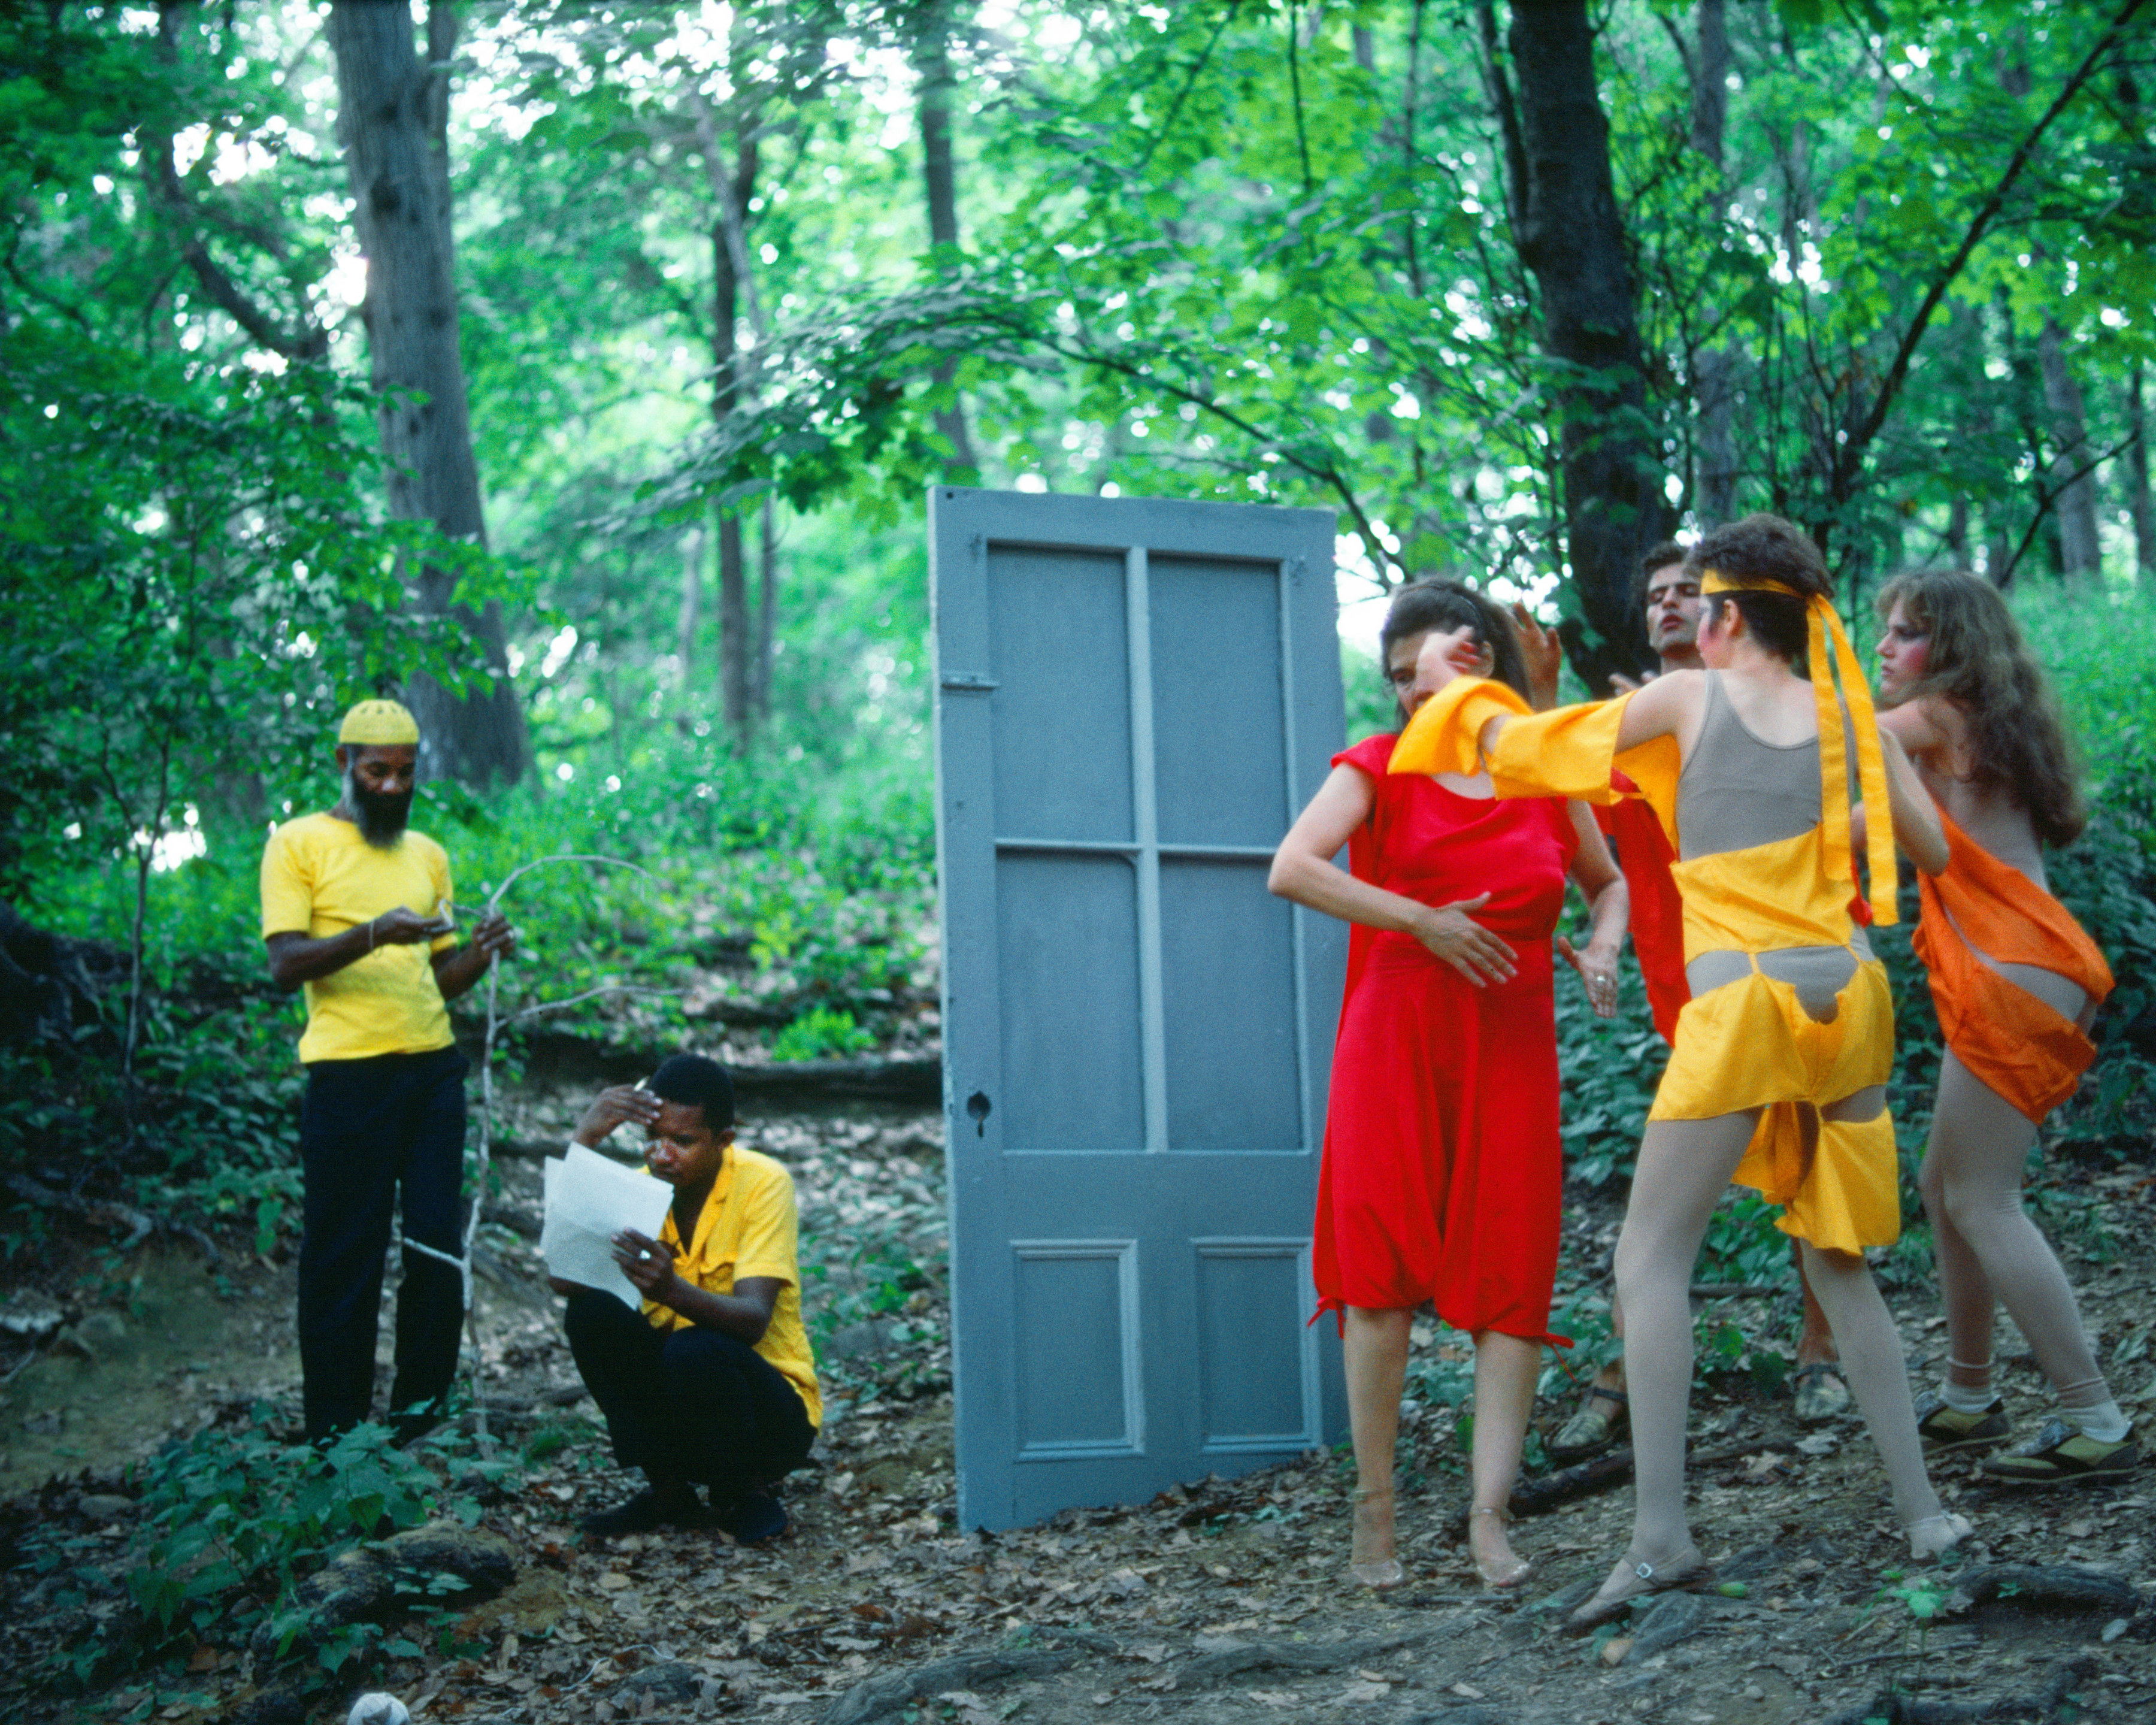 Rivers, First Draft: The Woman in Red begins to break away from the Debauchees, 1982/2015, Digital C-print from Kodachrome 35mm slides in 48 parts, 16h x 20w in (40.64h x 50.80w cm)